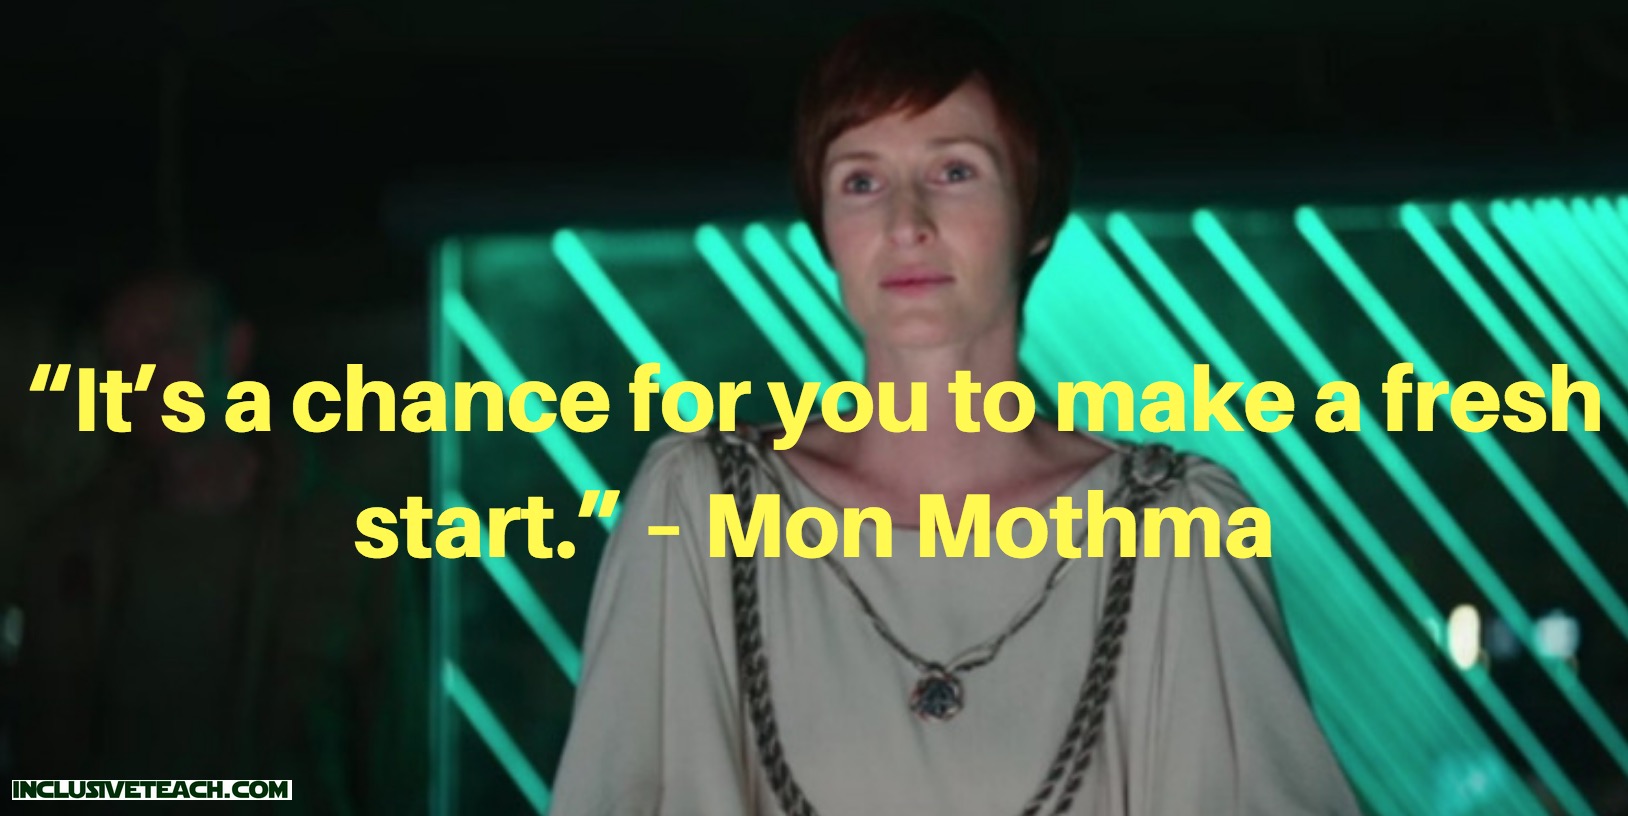 “It’s a chance for you to make a fresh start.” – Mon Mothma Star Wars quote teacher.jpg